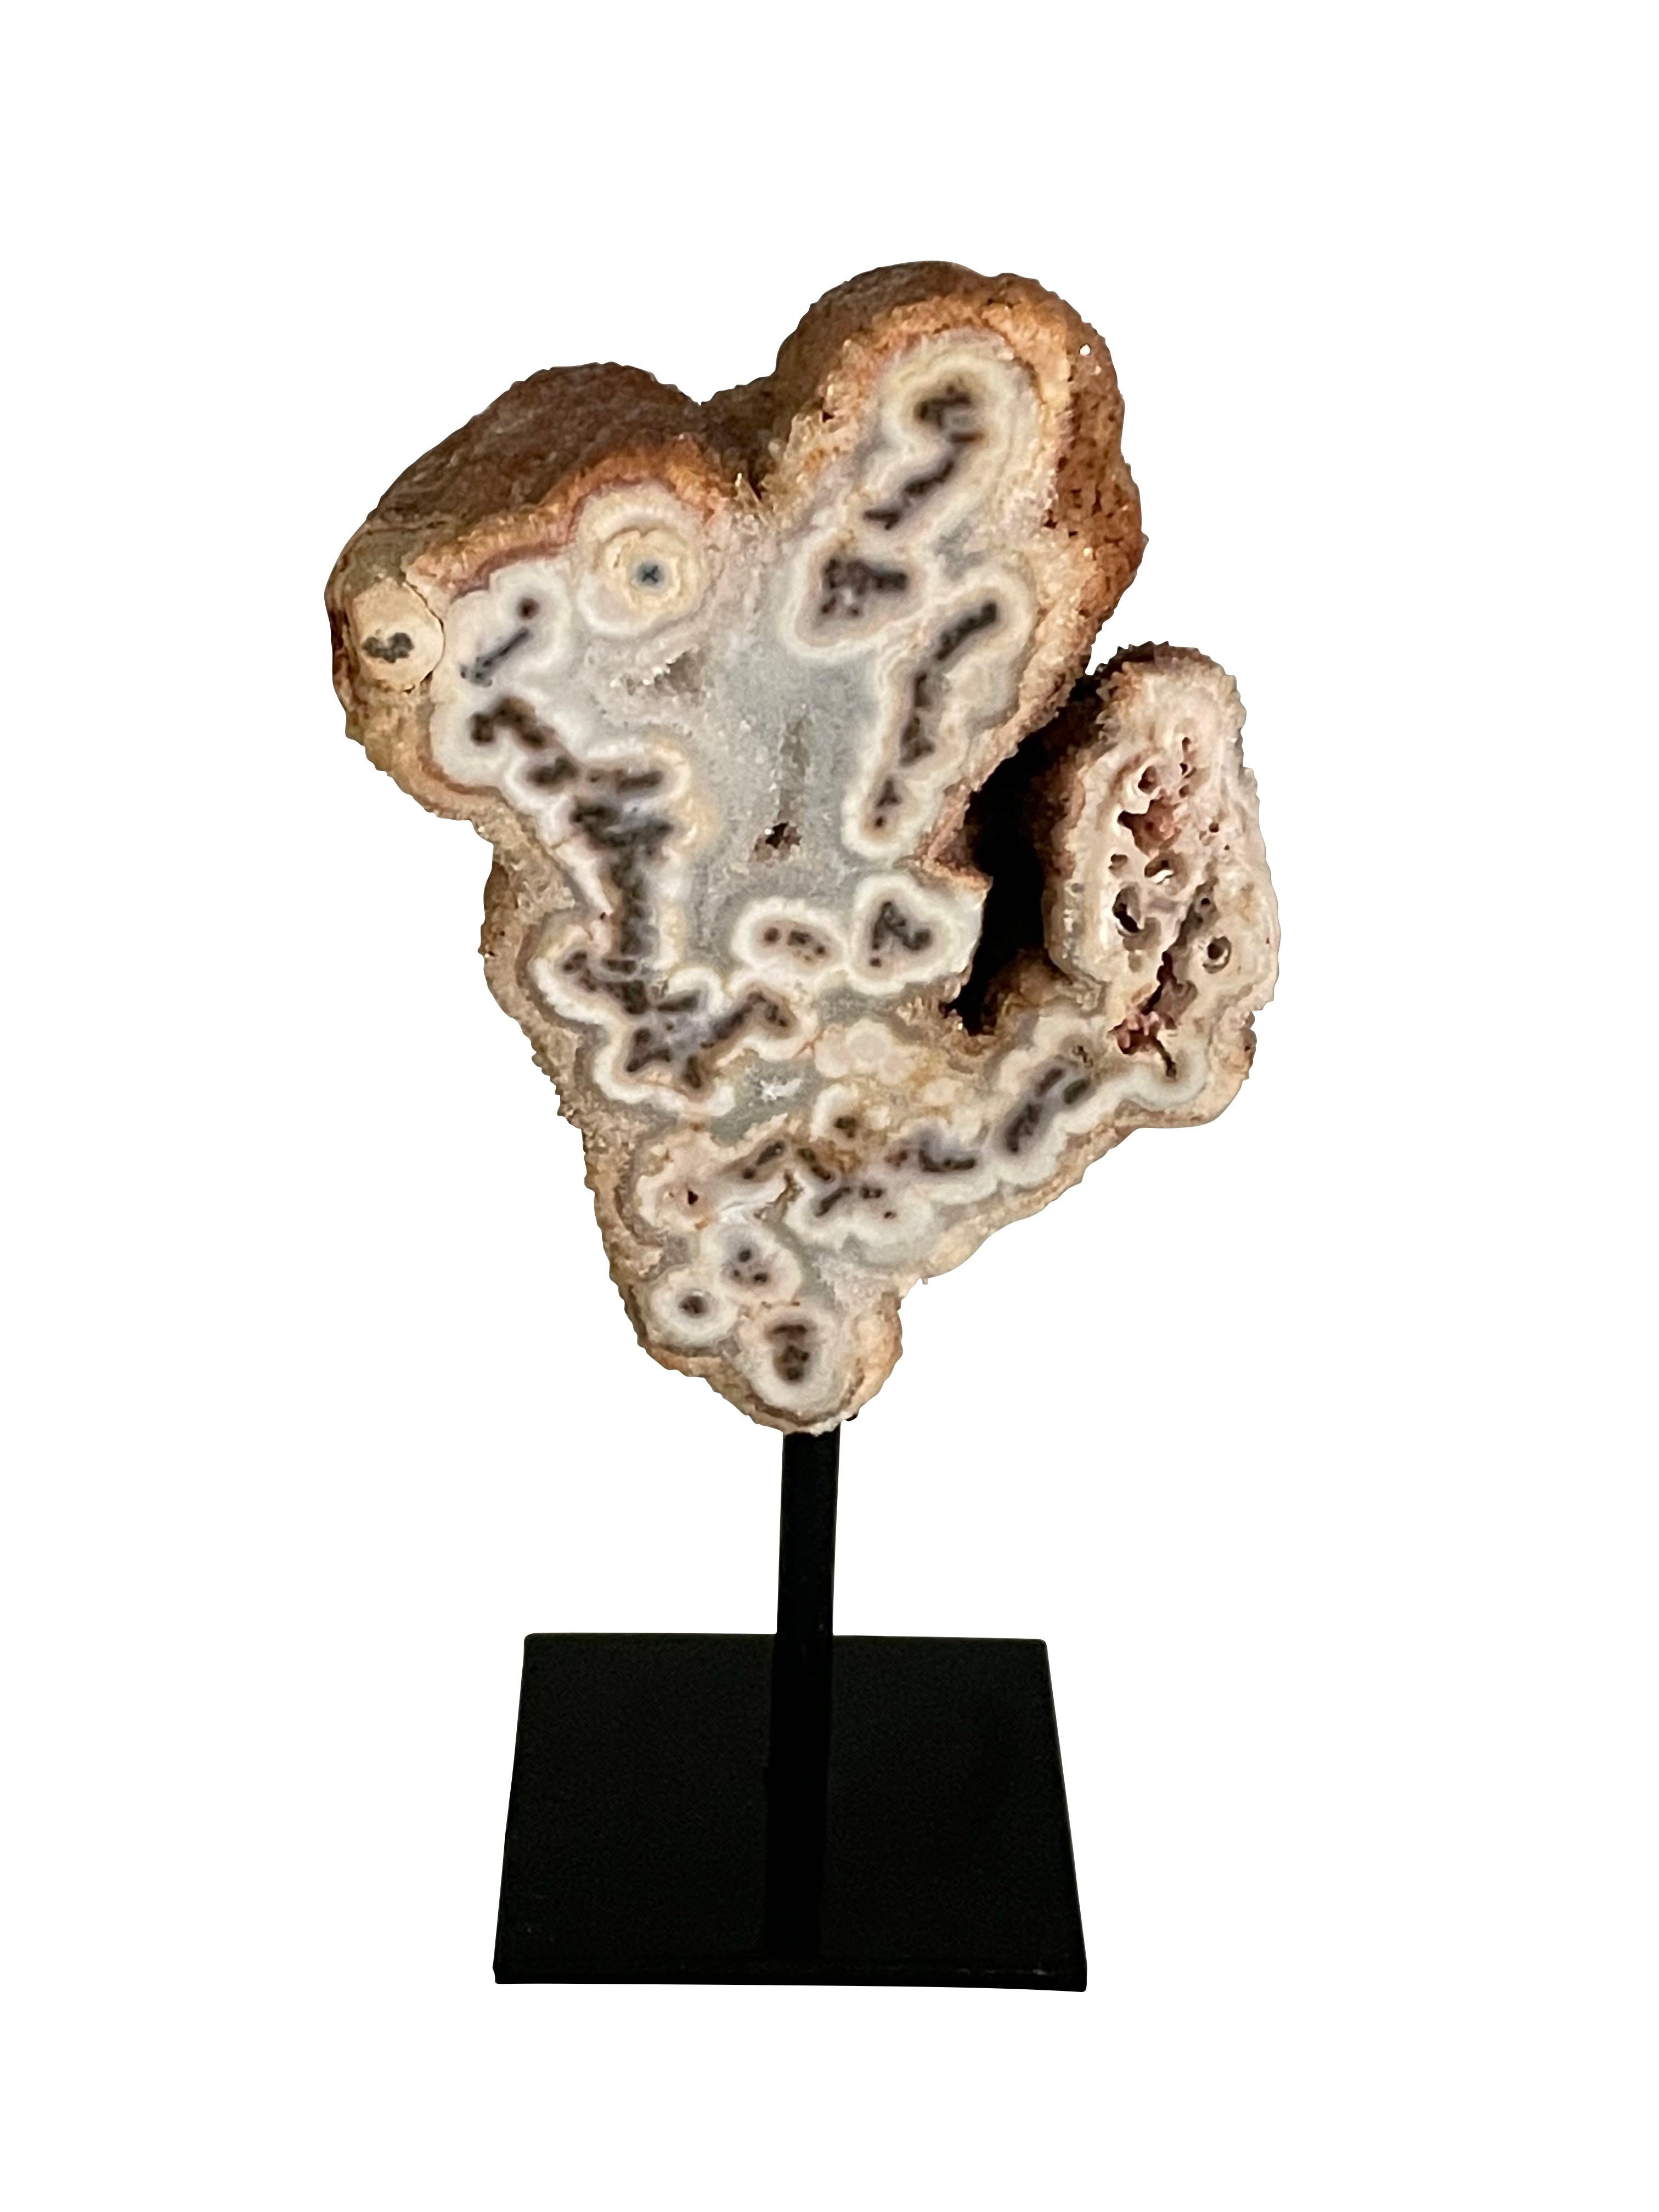 Brazilian extra small tree agate mounted on stand.
Tan in color with natural dark brown design.
